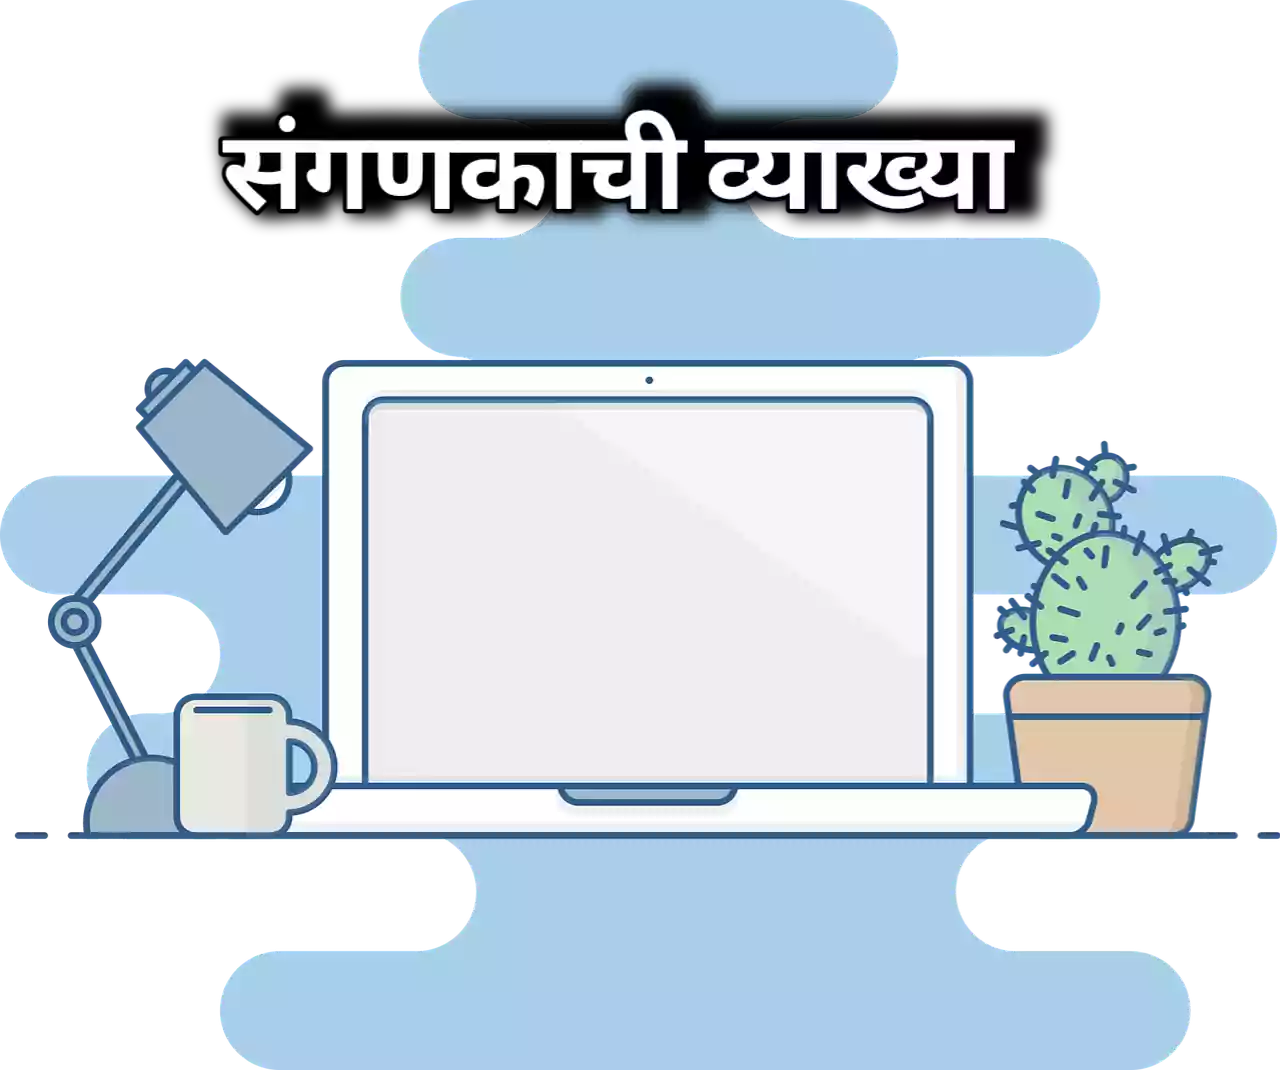 Definition of Computer In Marathi